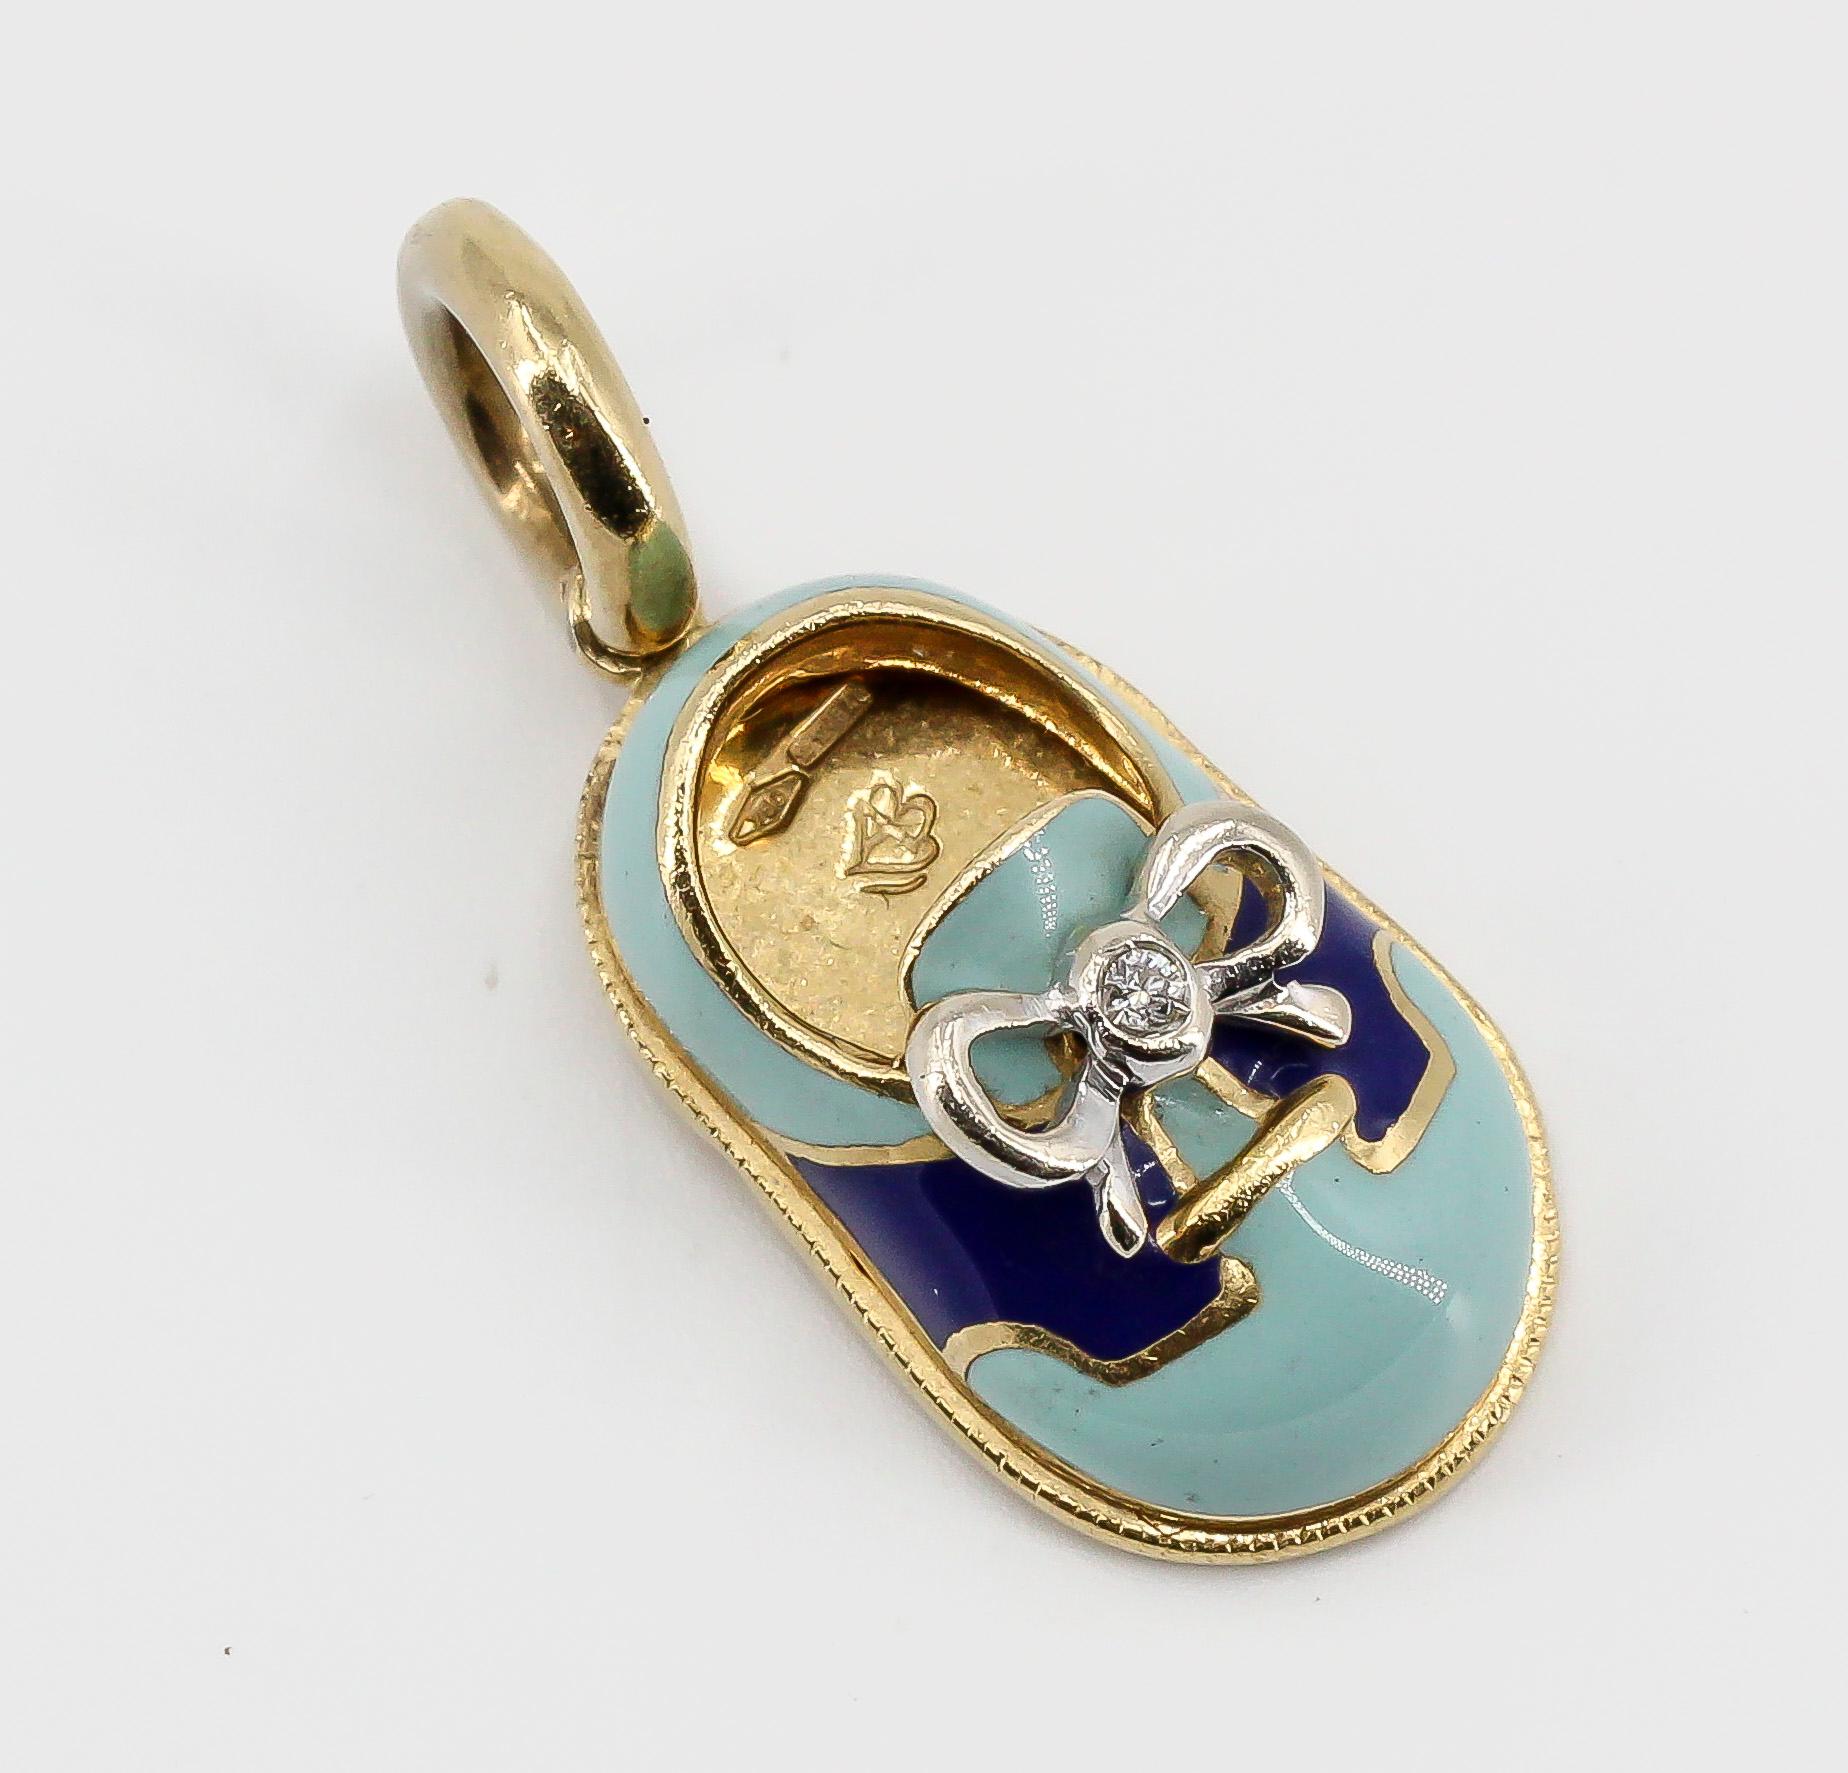 Whimsical diamond, blue enamel and 18K yellow gold baby boy shoe charm by Aaron Basha. Features two shades of blue with one single high grade round brilliant cut diamond over a gold setting.

Hallmarks: Aaron Basha, maker's mark, 750, Italian